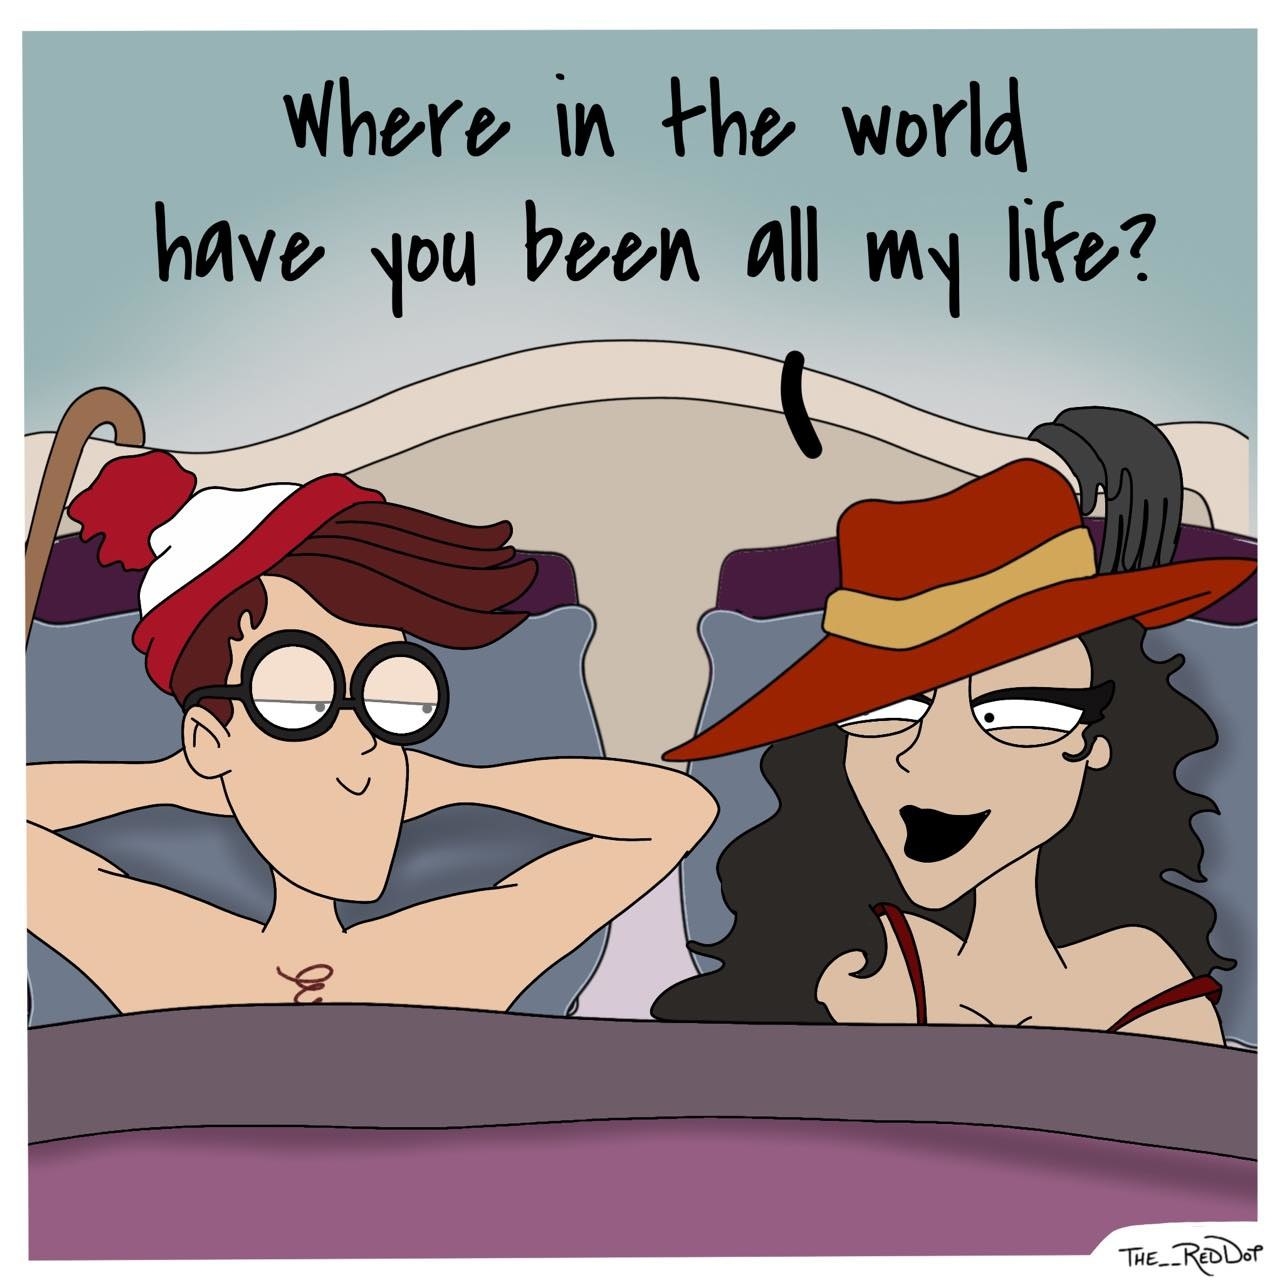 Where&#x27;s Waldo and Carmen Sandiego in bed with her asking Waldo where he&#x27;s been her whole life